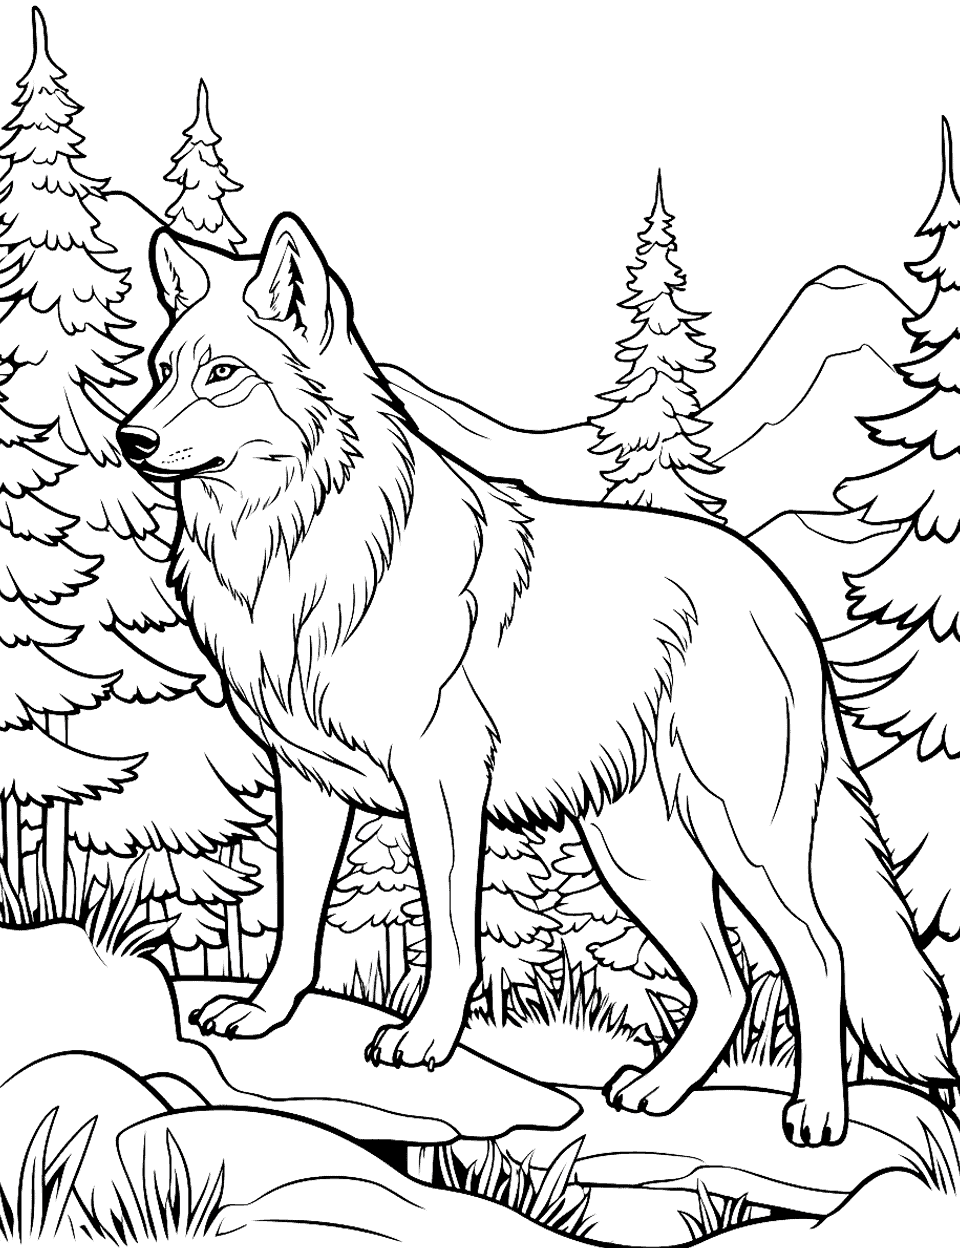 Detailed Wolf in the Forest Coloring Page - A wolf amidst a detailed backdrop of trees, rocks, and a flowing stream.